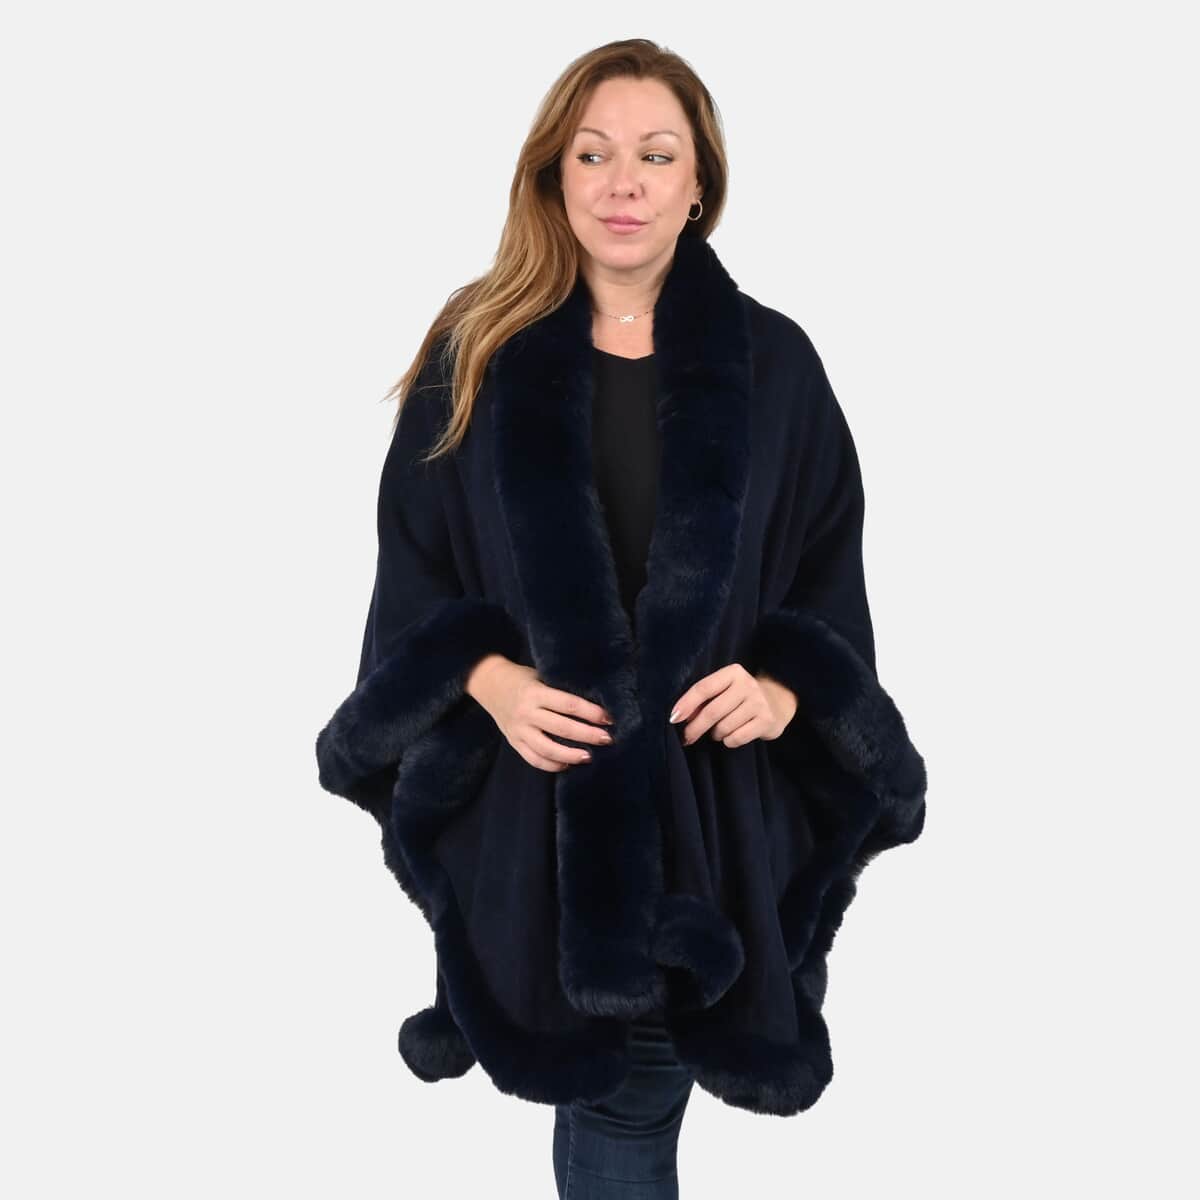 Designer Inspired Navy Ruana with Faux Fur Trim - One Size Fits Most image number 3